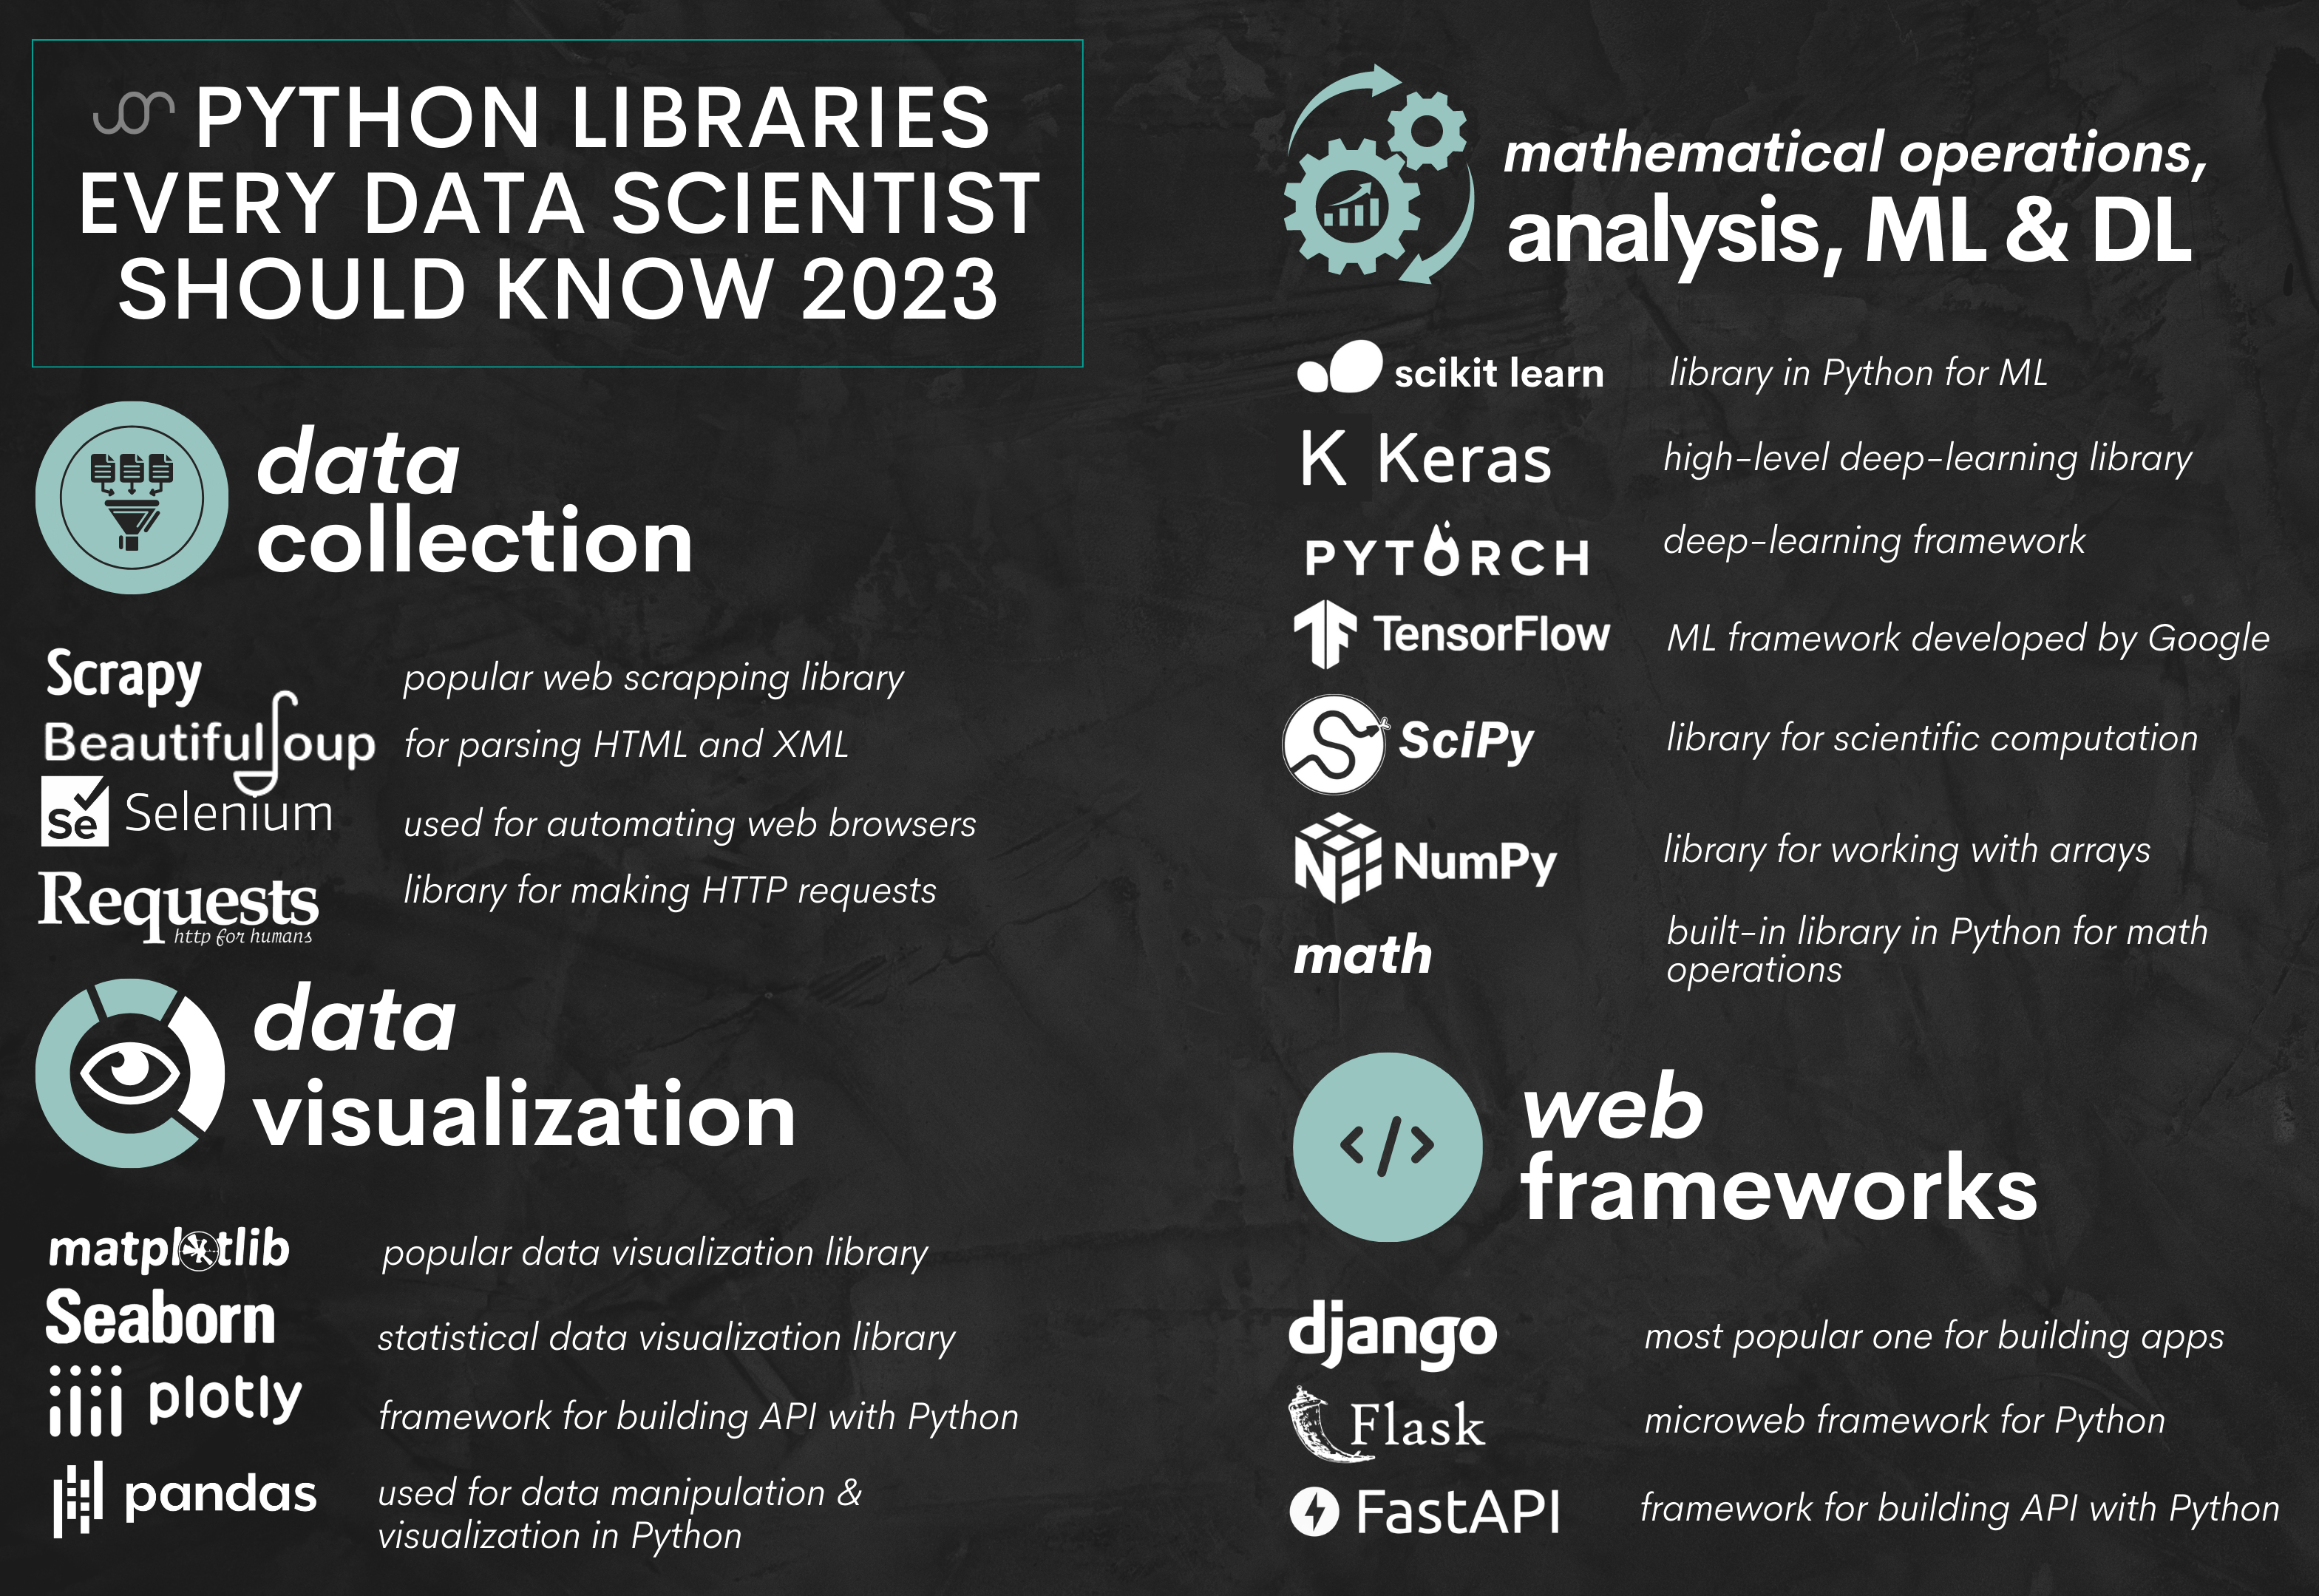 What are the major Python Libraries used in Data Science